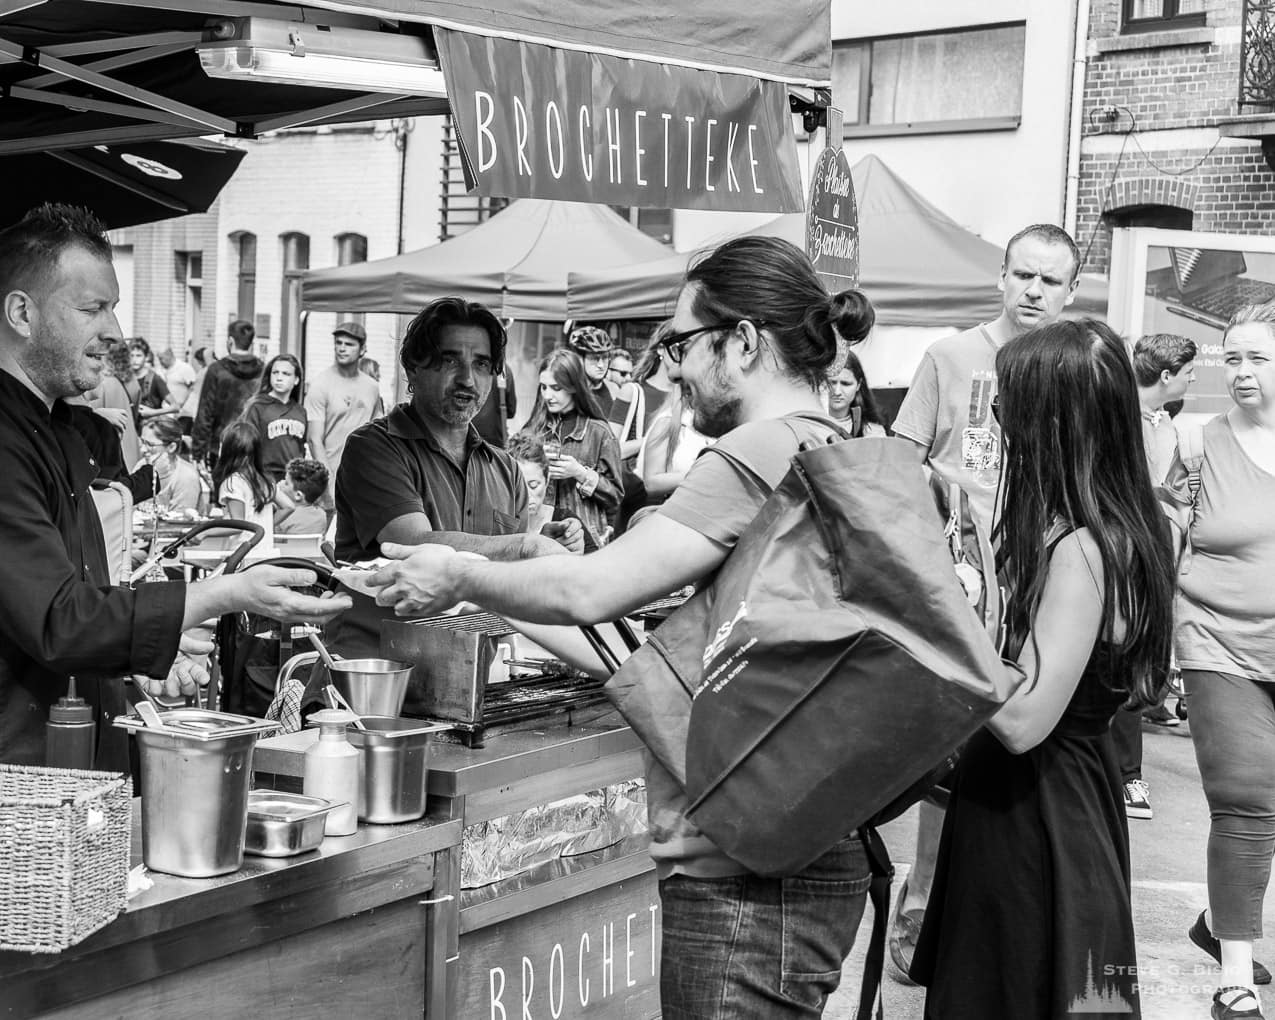 Photo 14/32 of a series of black and white photographs from the 2018 Grande Braderie D'Ixelles sidewalk sale and street festival in Brussels, Belgium.